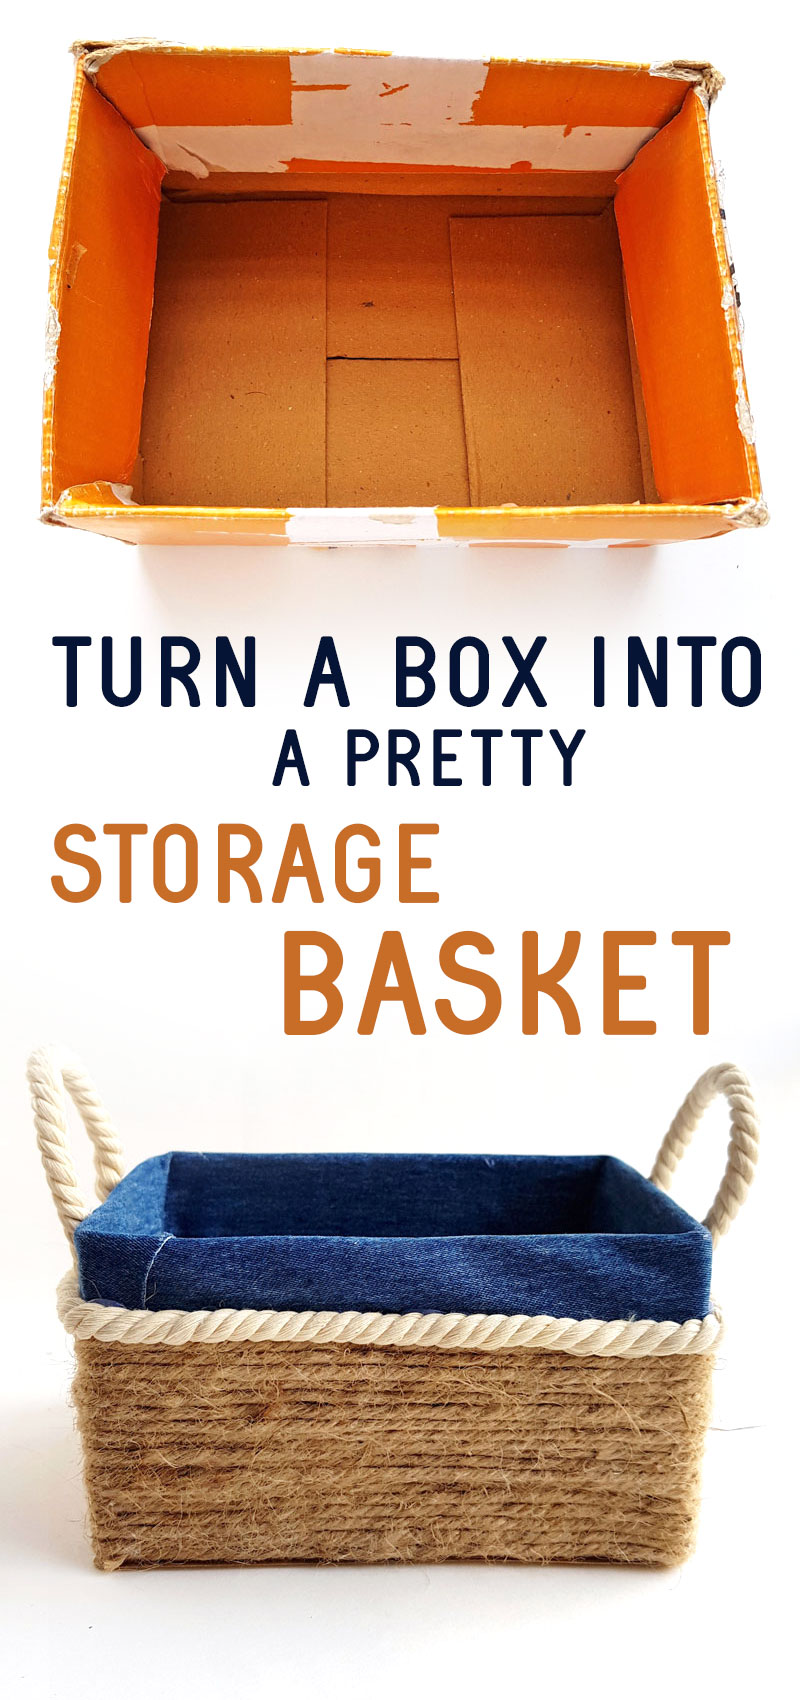 Click, to learn how to turn a plain cardboard box into a DIY storage bin in just a few steps! This DIY organizing solution is a great way to spring clean and repurpose cardboard boxes.